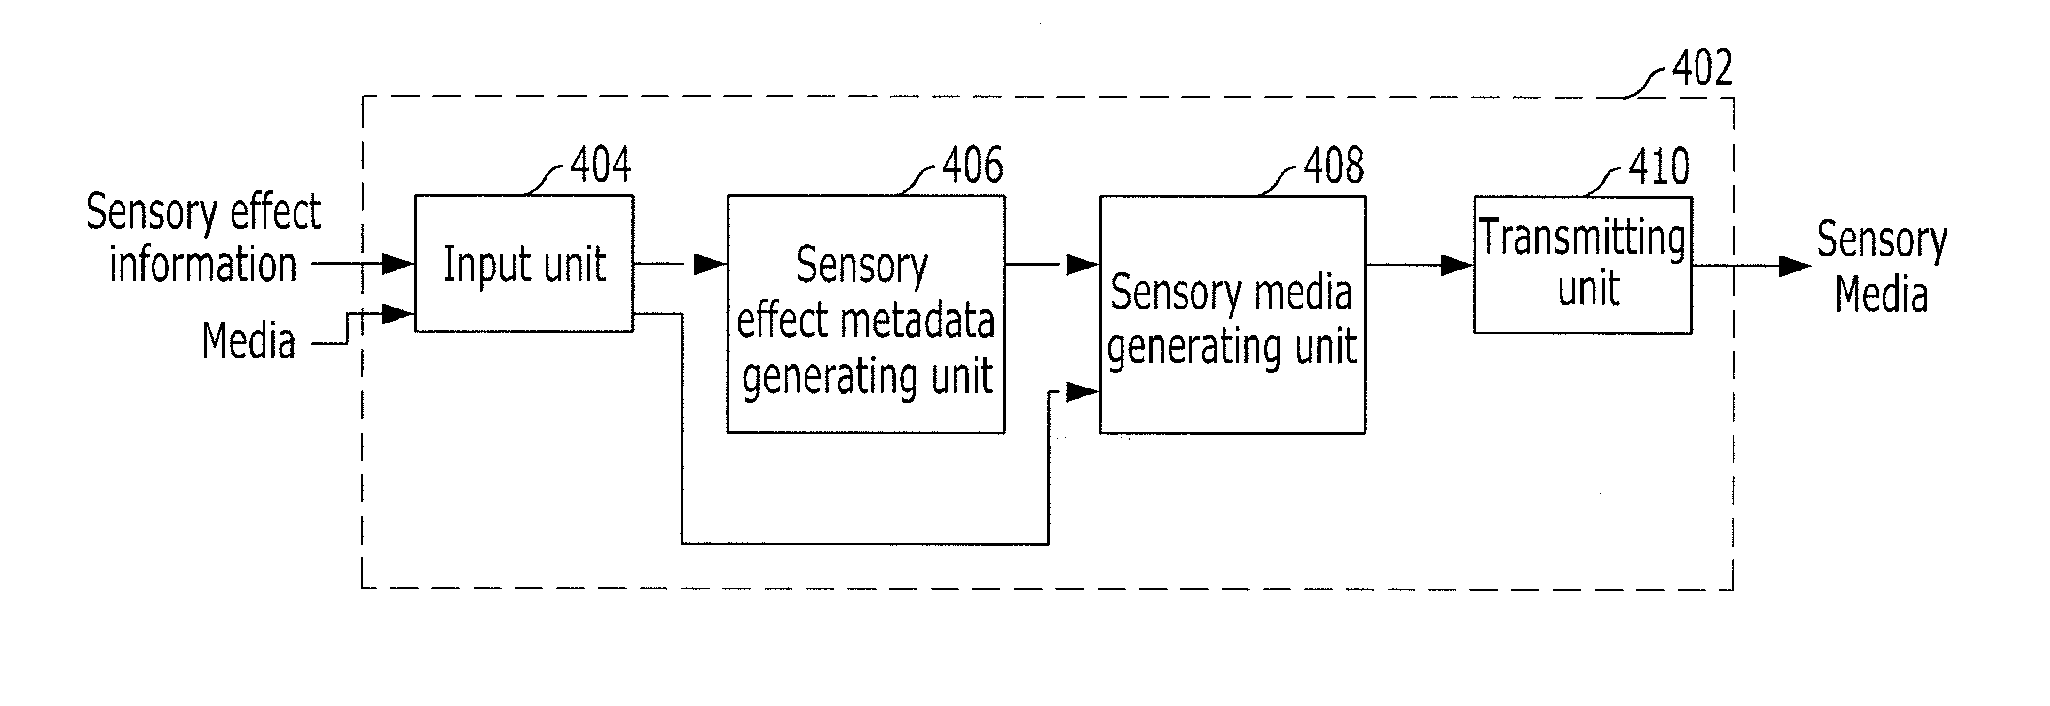 Method and apparatus for representing sensory effects using sensory device capability metadata